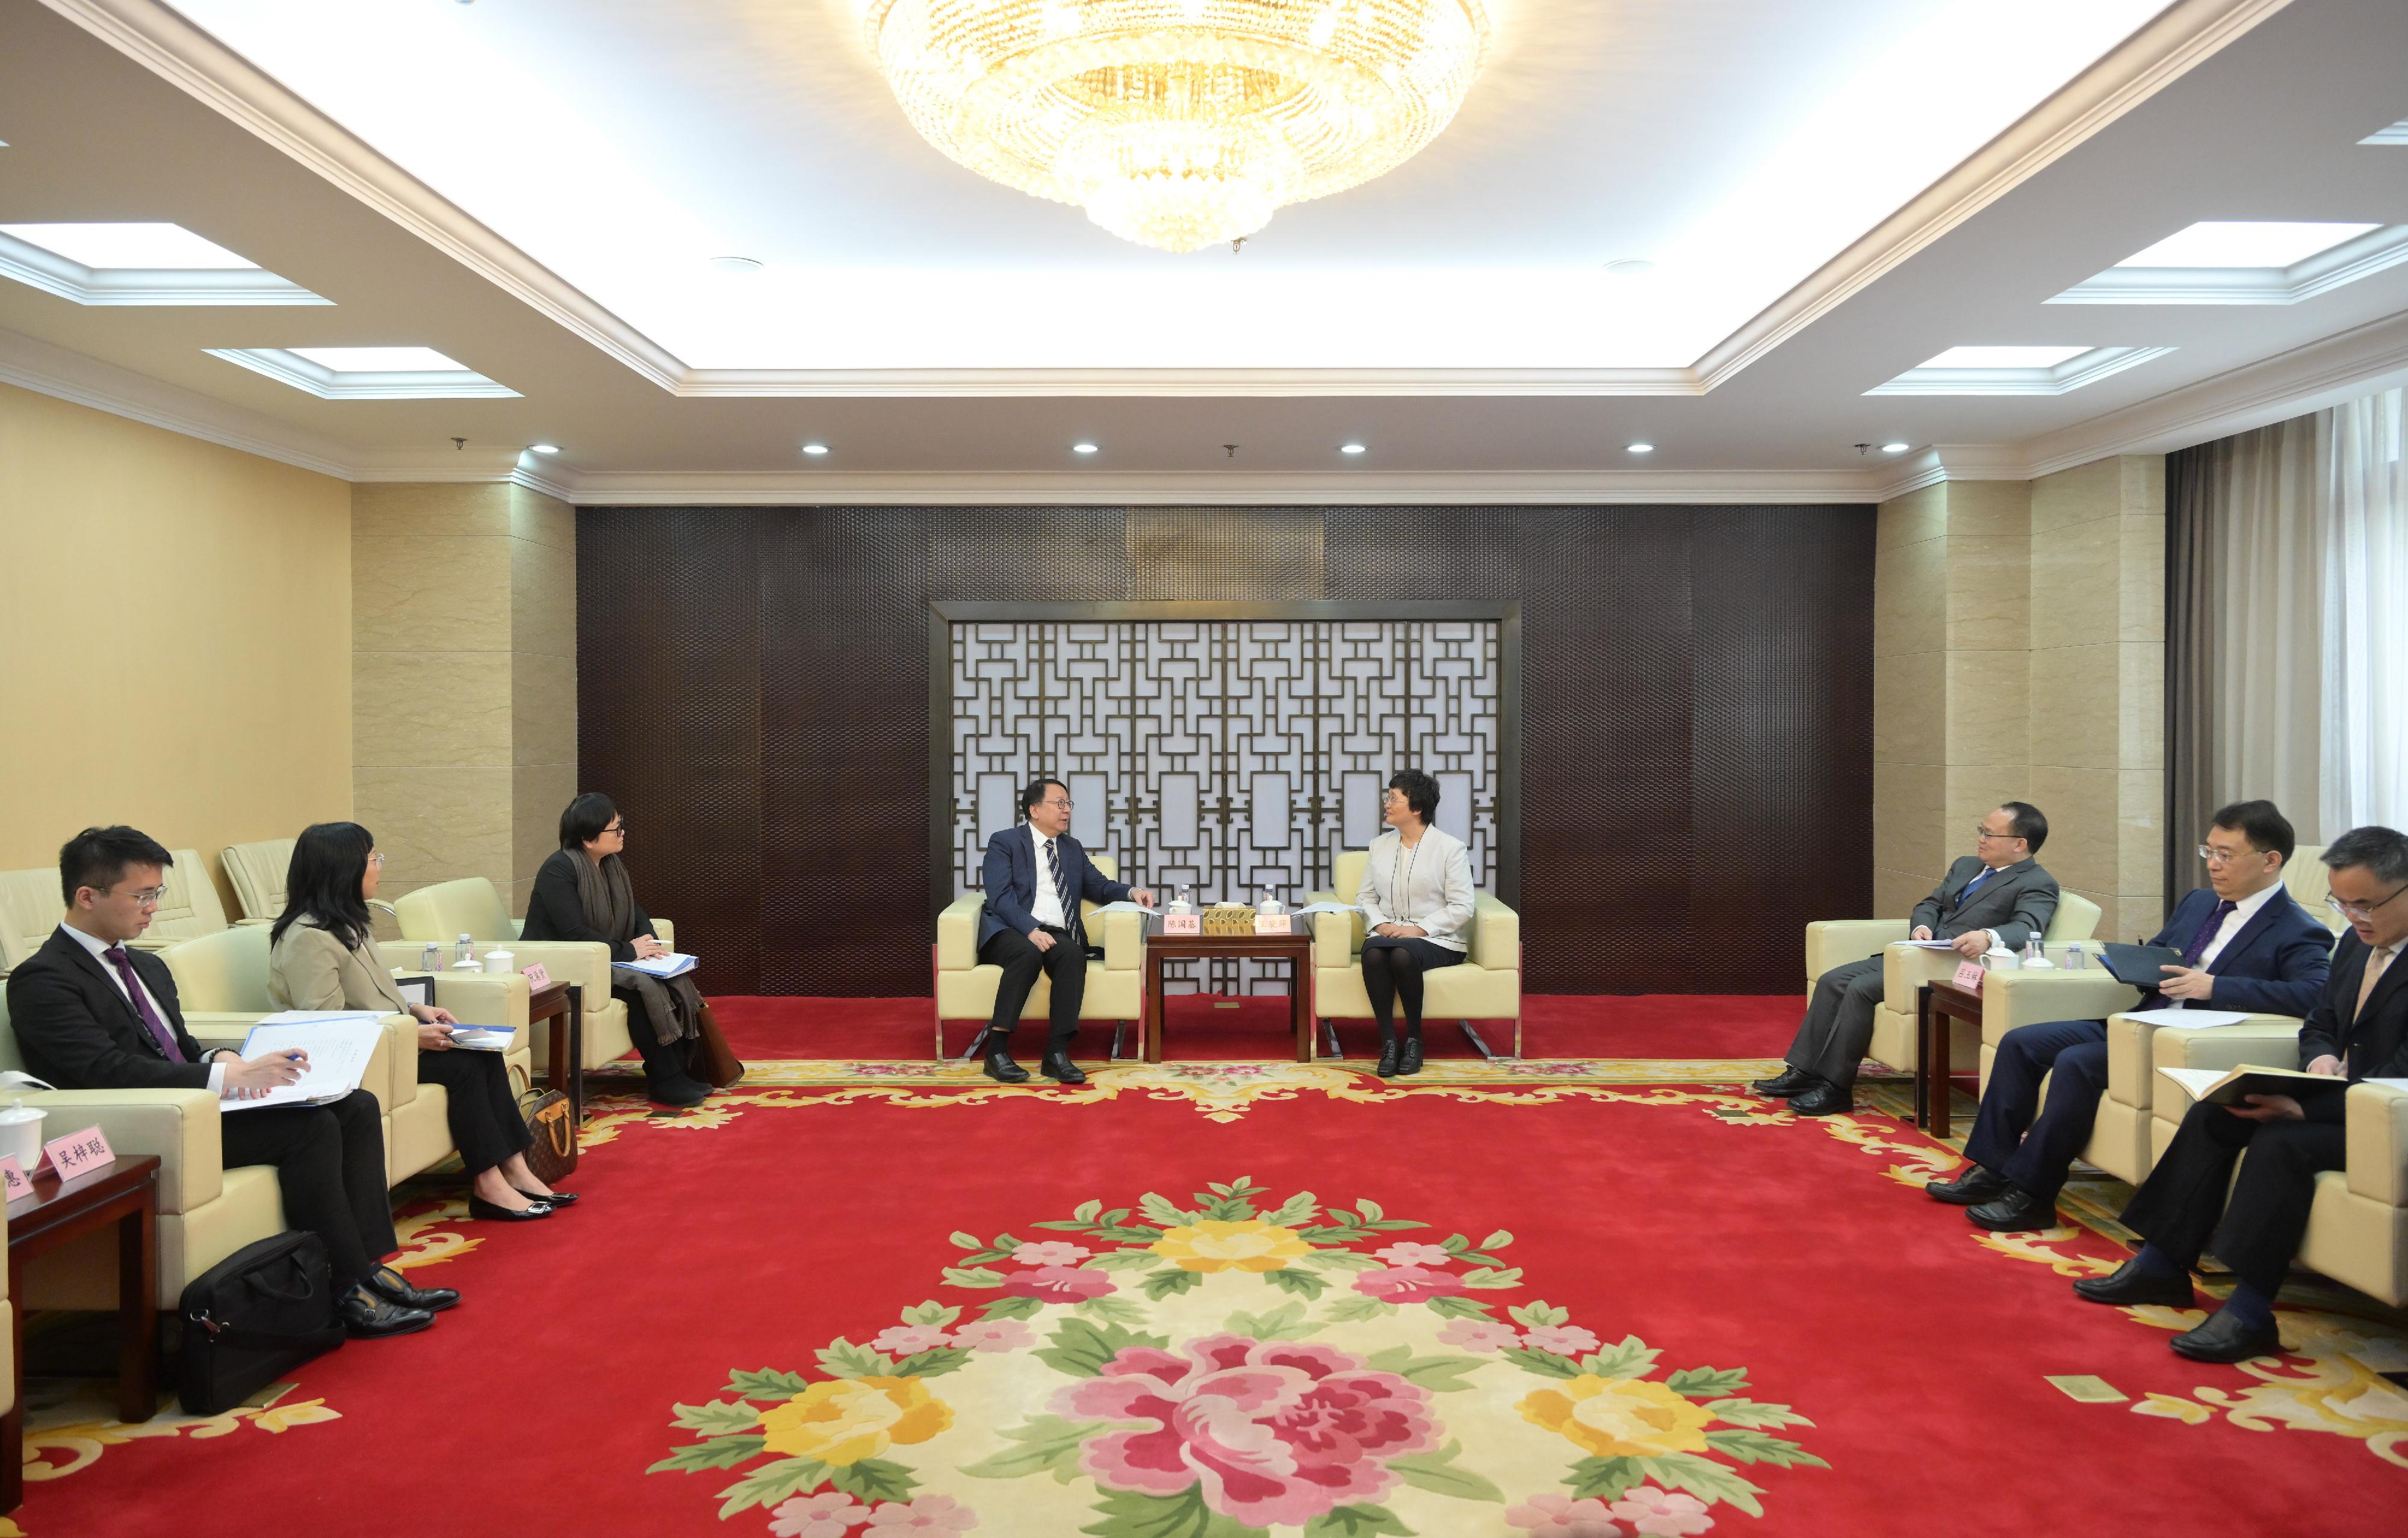 The Chief Secretary for Administration, Mr Chan Kwok-ki (fourth left), meets with the Minister of Human Resources and Social Security, Ms Wang Xiaoping (fourth right), in Beijing today (April 27). Also attending the meeting is the Deputy Director of the Office of the Government of the Hong Kong Special Administrative Region in Beijing, Miss Amy Yuen (third left). 